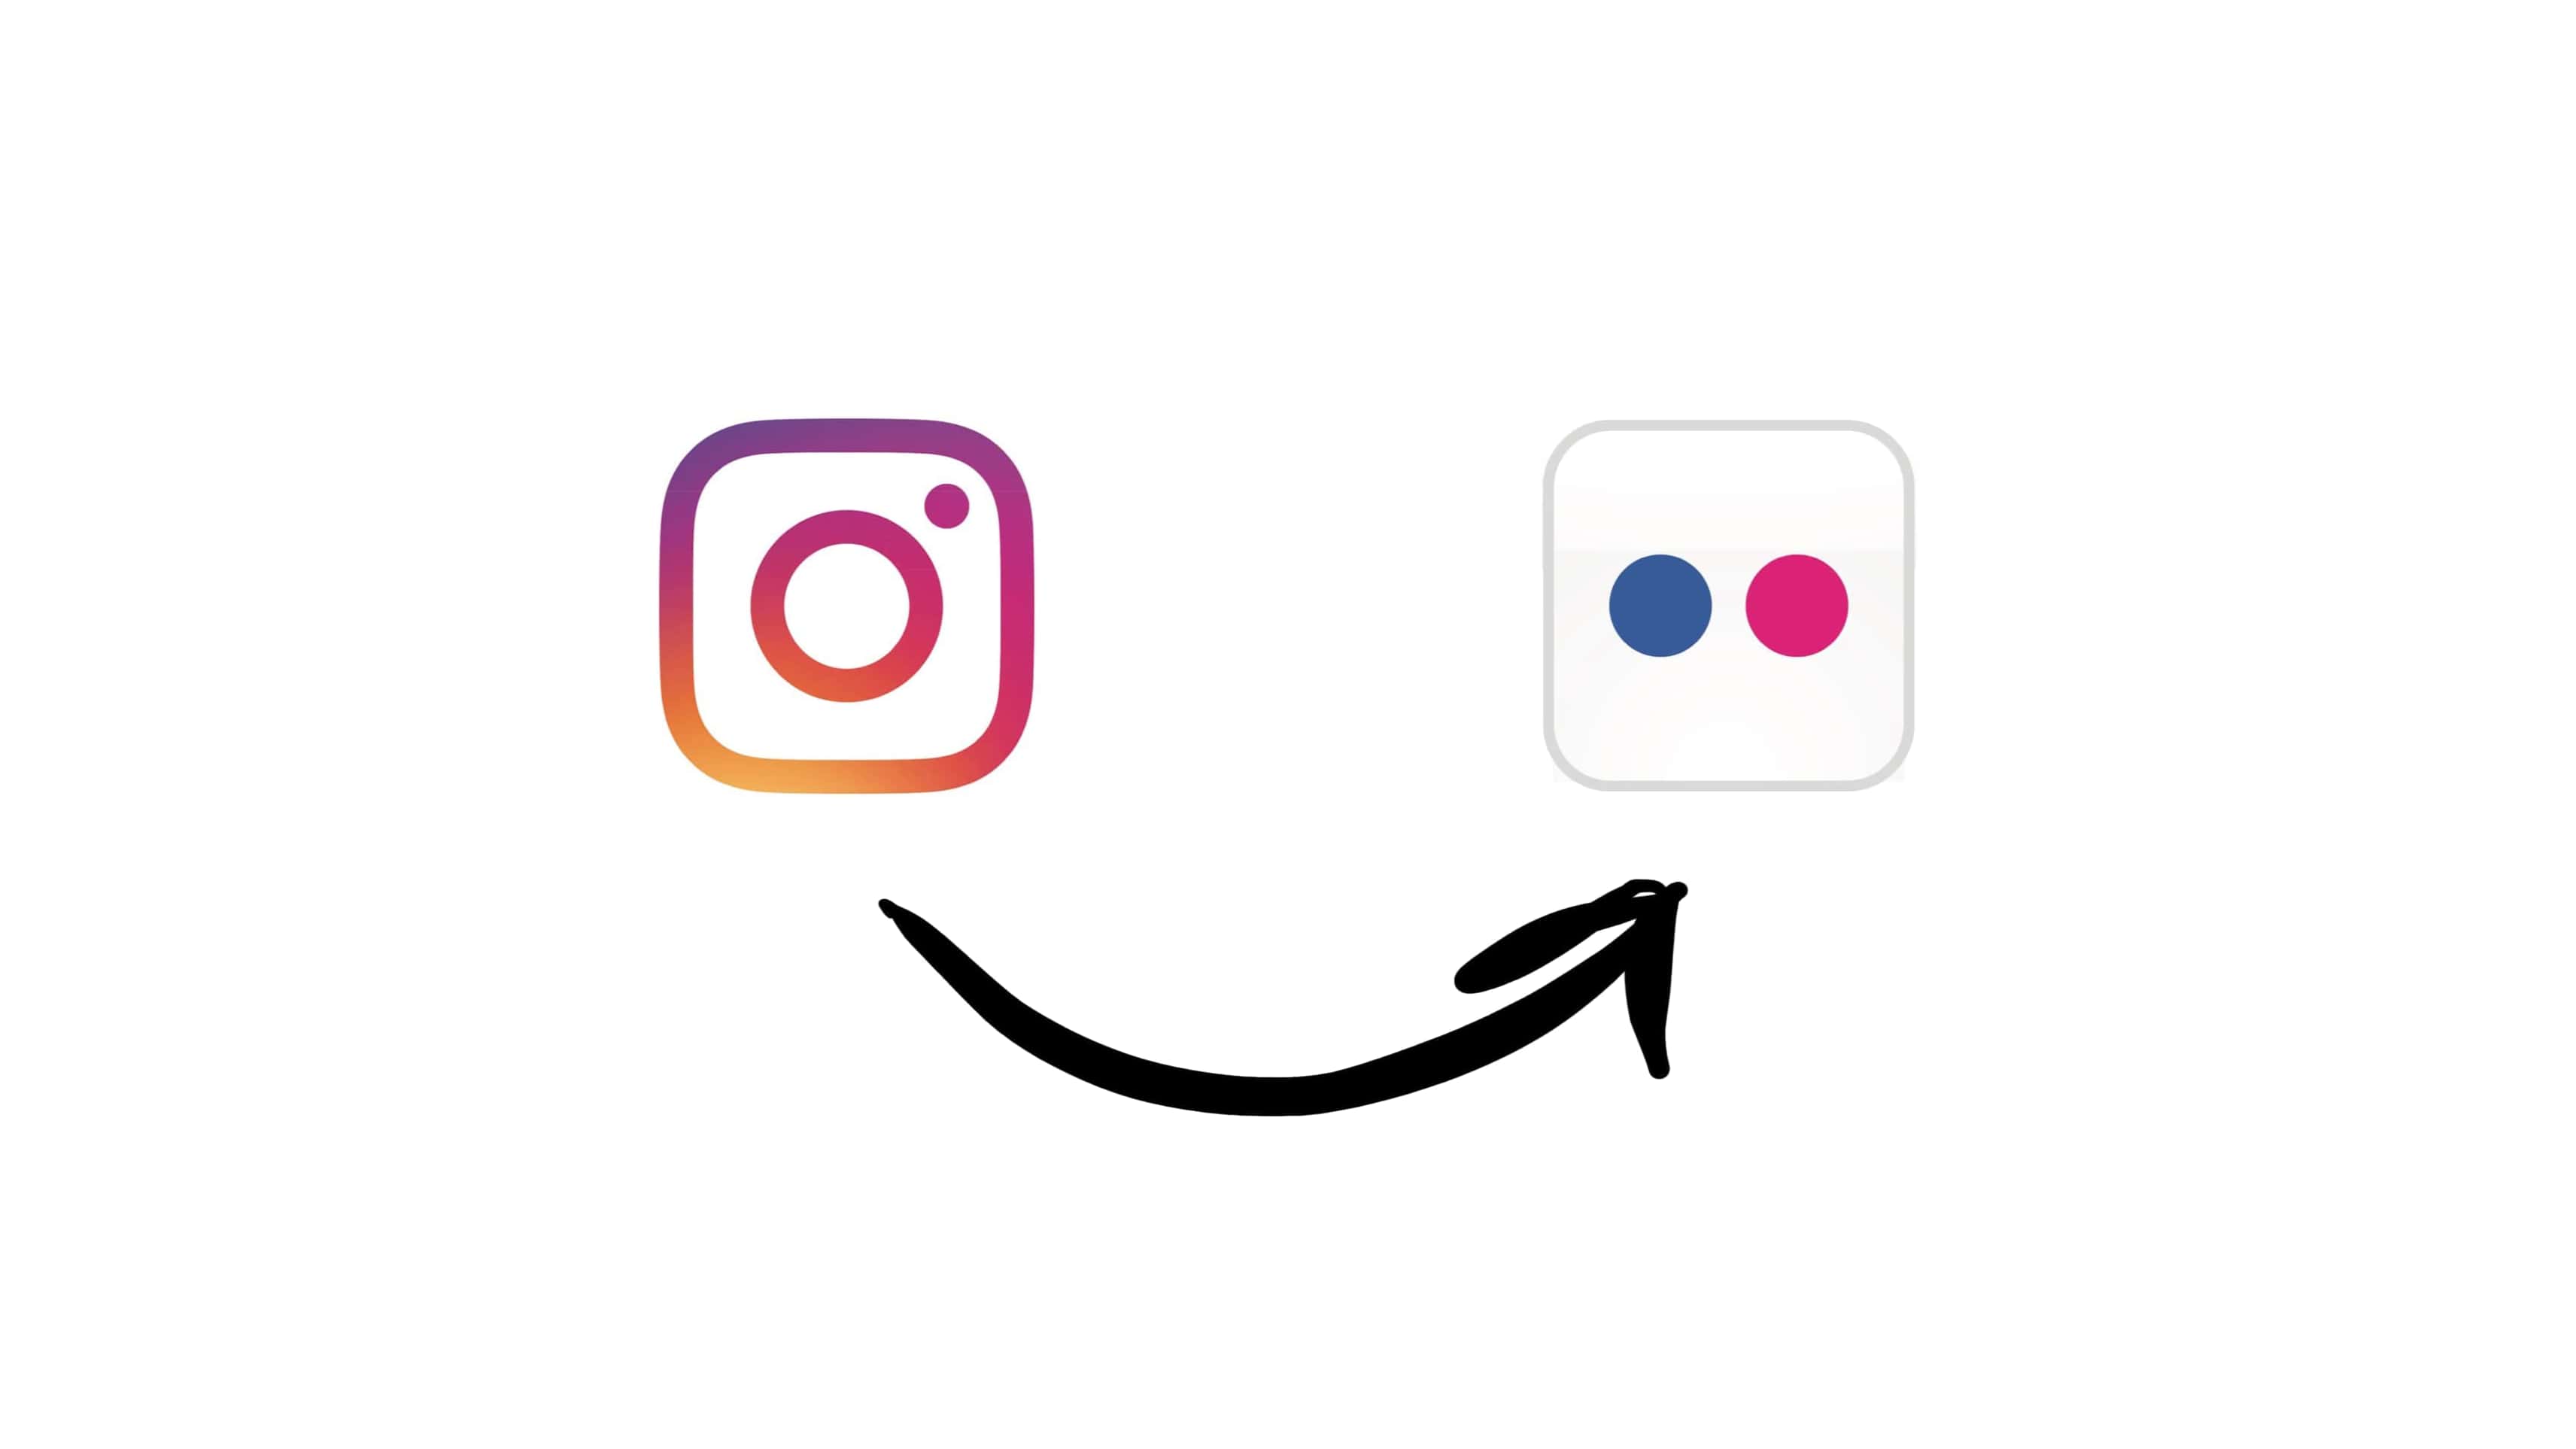 Instagram logo pointing to Flickr logo with a smiling arrow